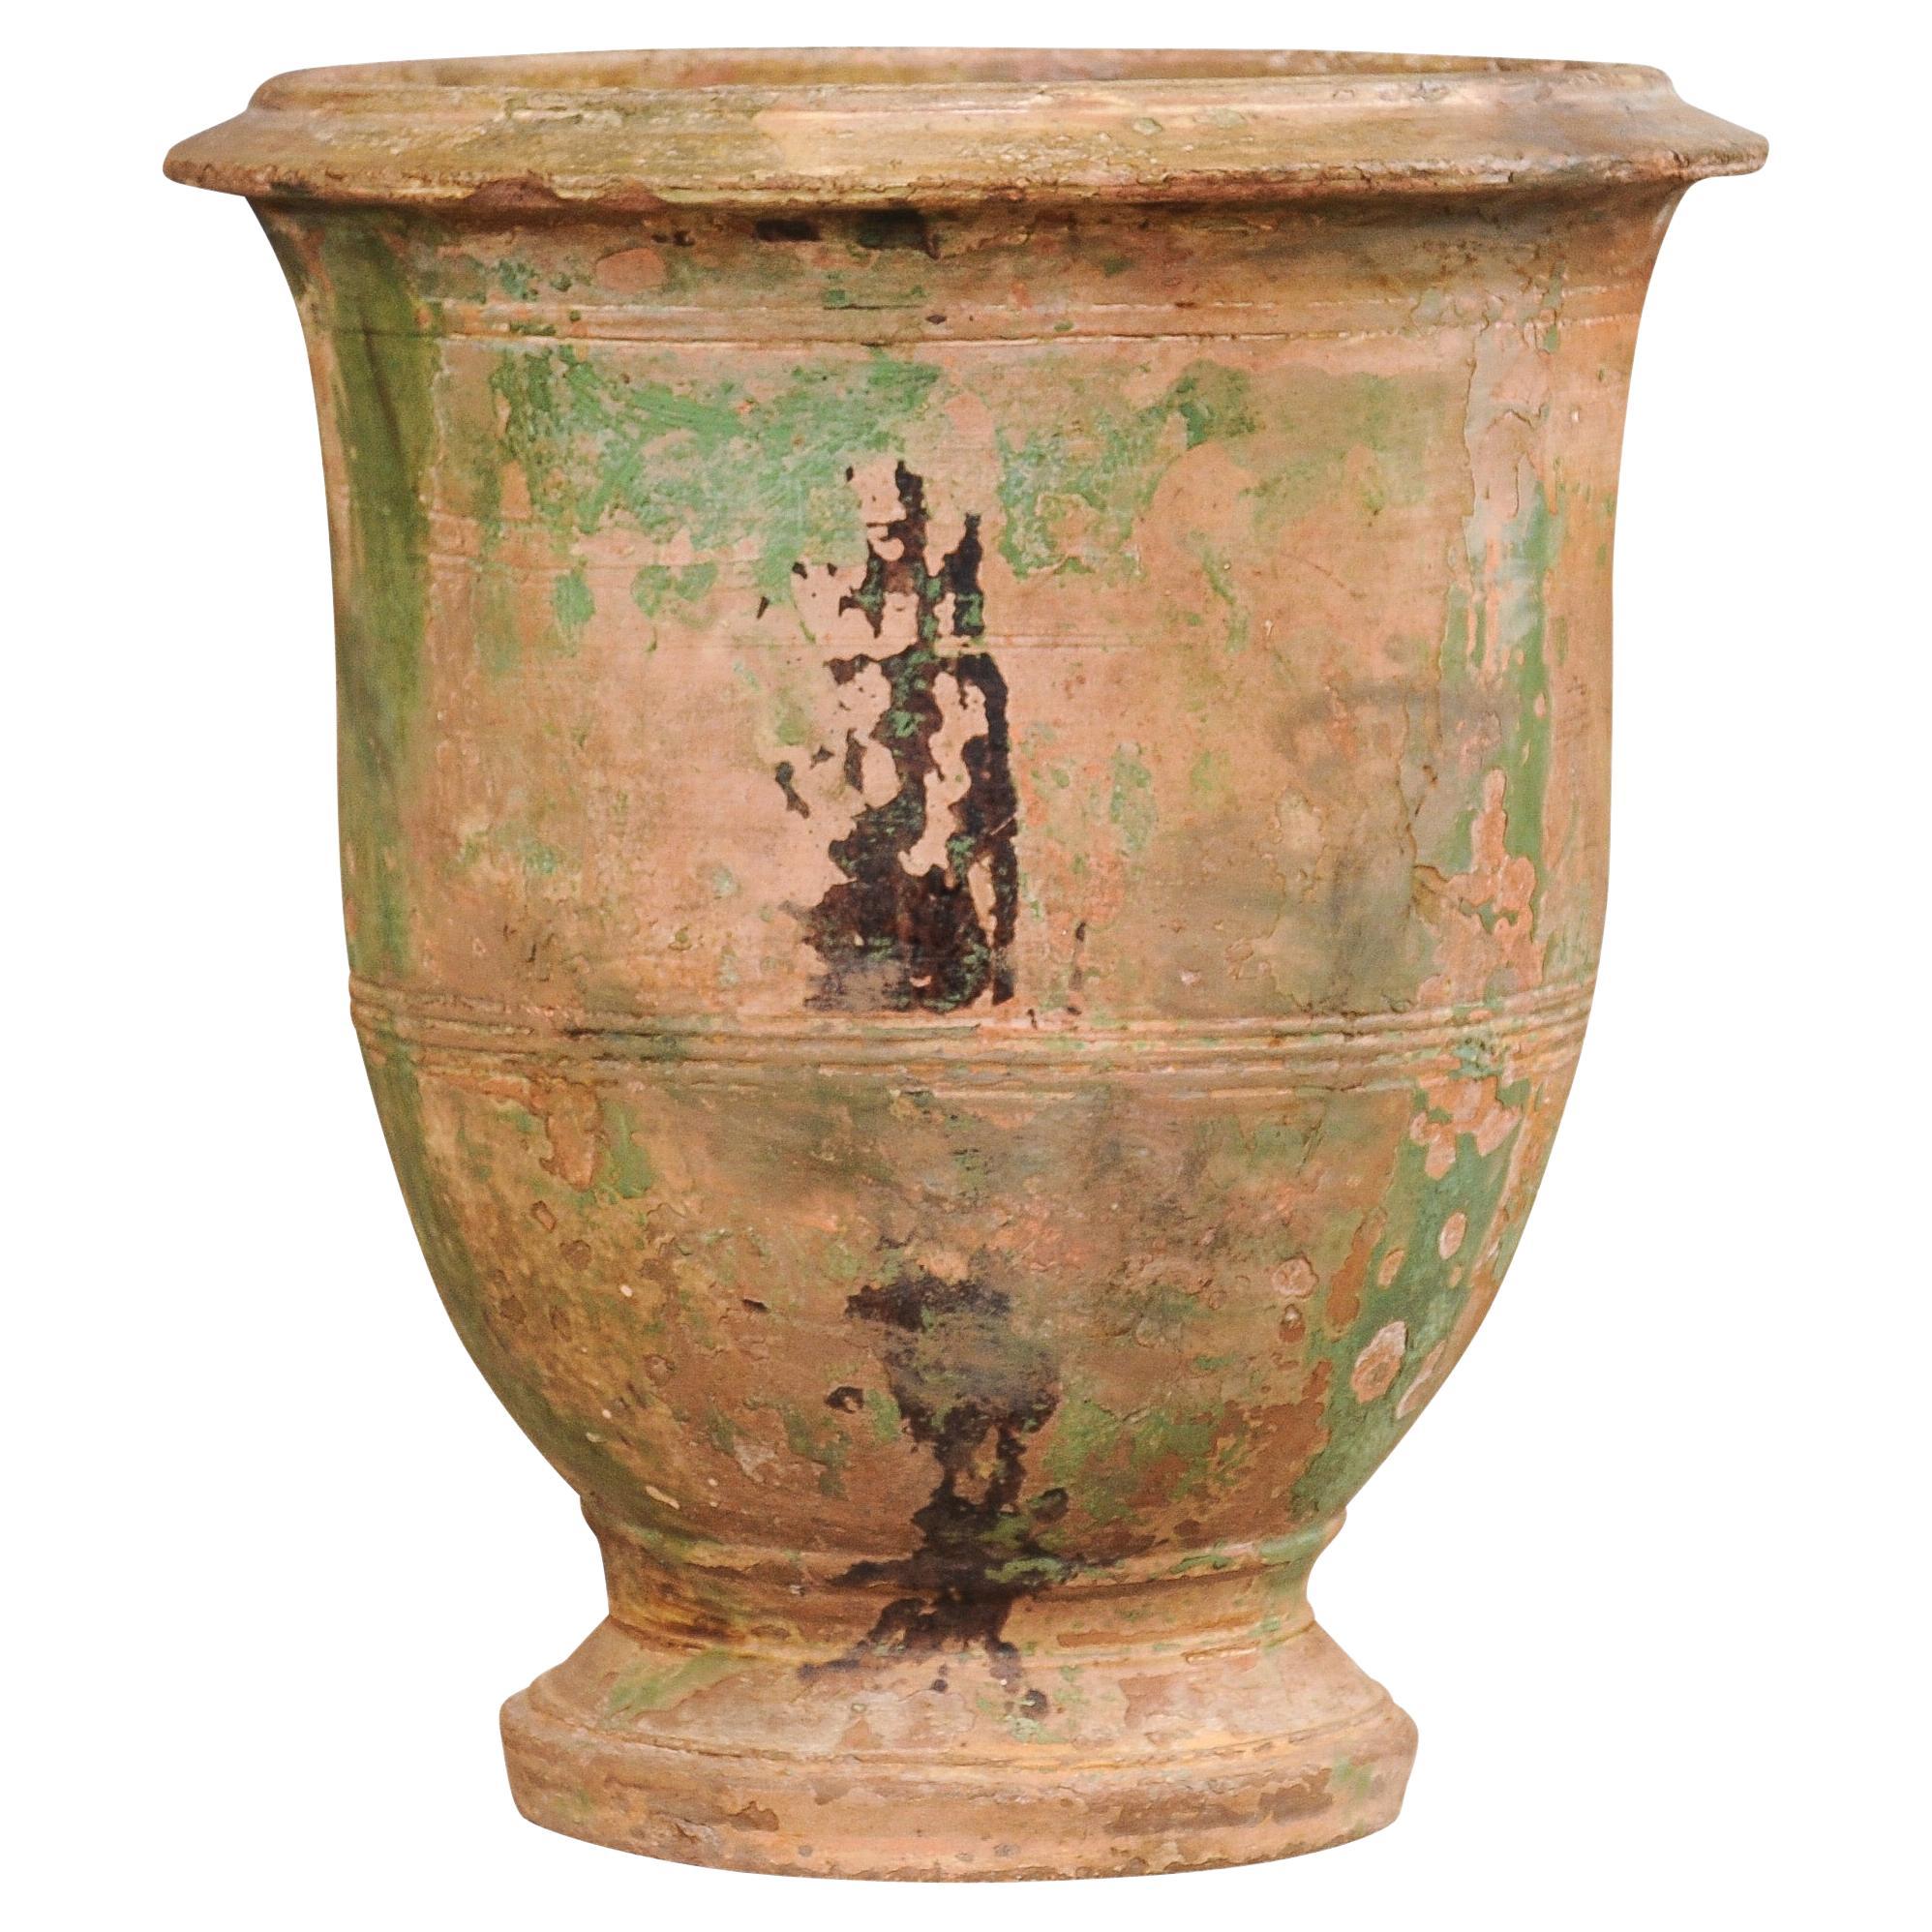 French Provençal Early 19th Century Anduze Vase with Hints of Green and Brown